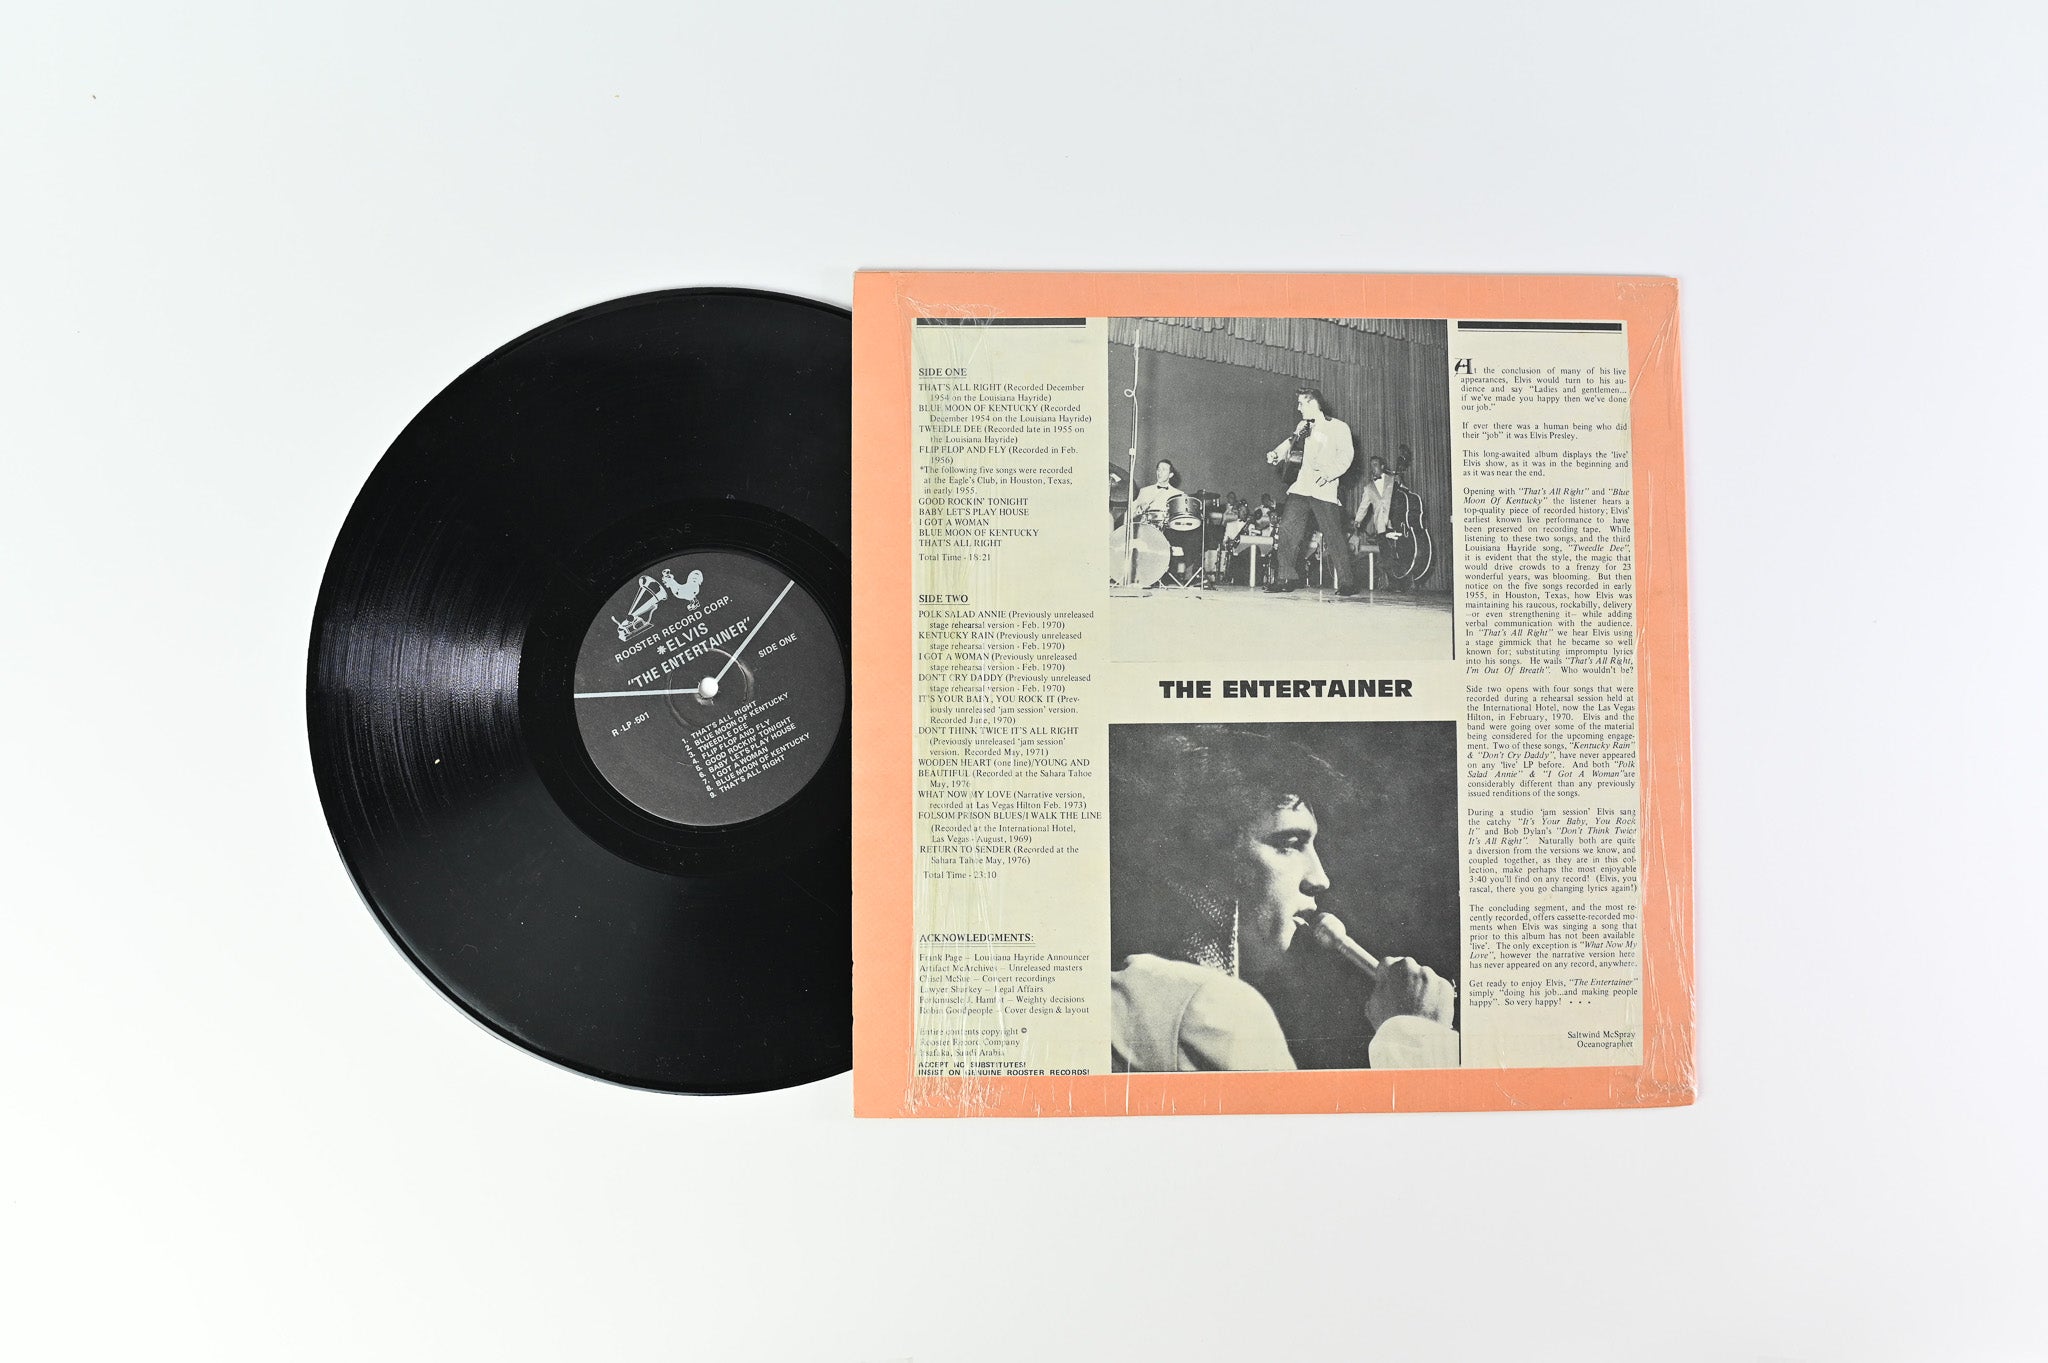 Elvis Presley - The Entertainer 1954-1976 on Rooster Unofficial Release